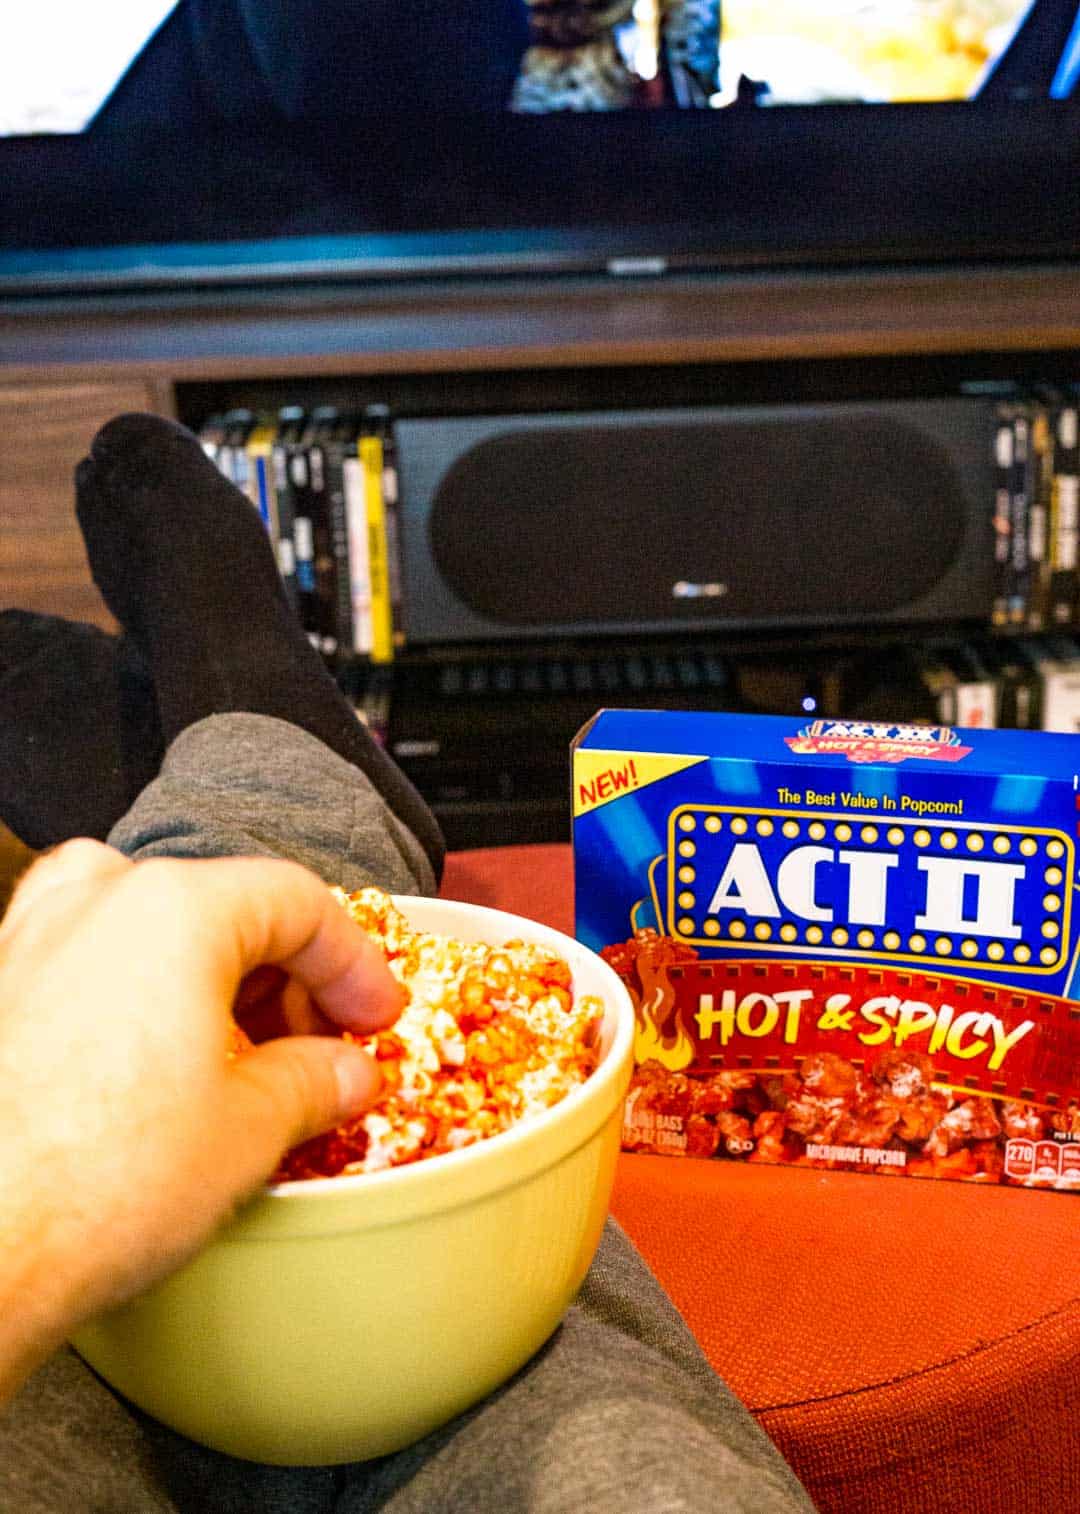 ACT II Hot & Spicy microwave popcorn